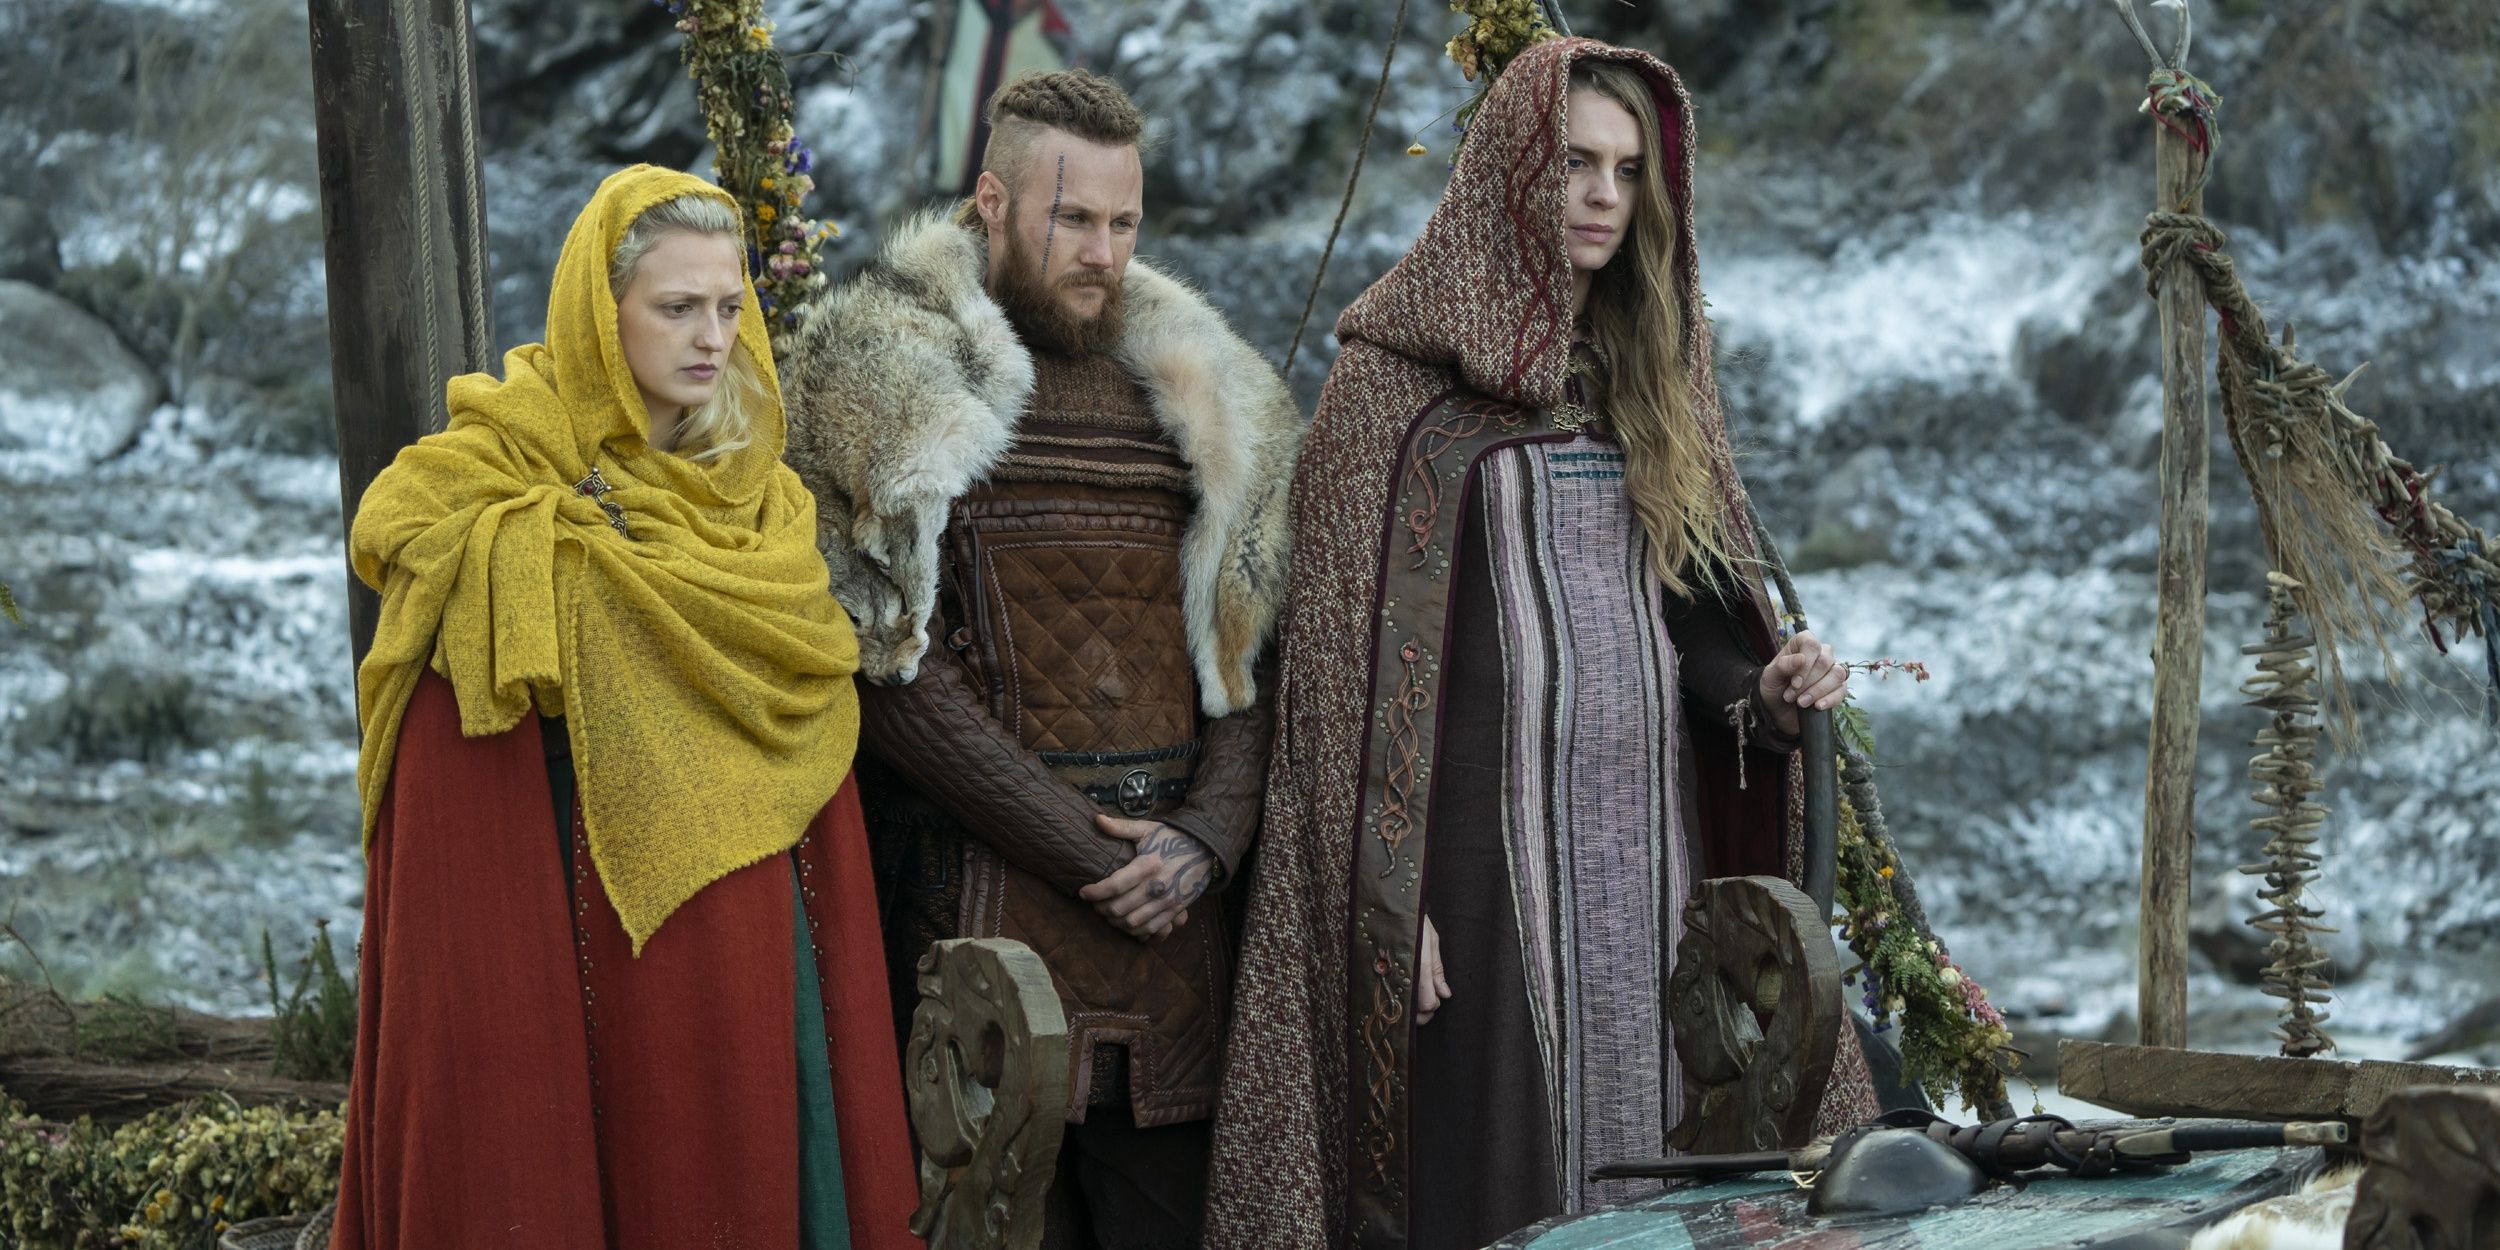 Ubbe, Torvi and Gunnhild attend Lagertha's funeral in Vikings